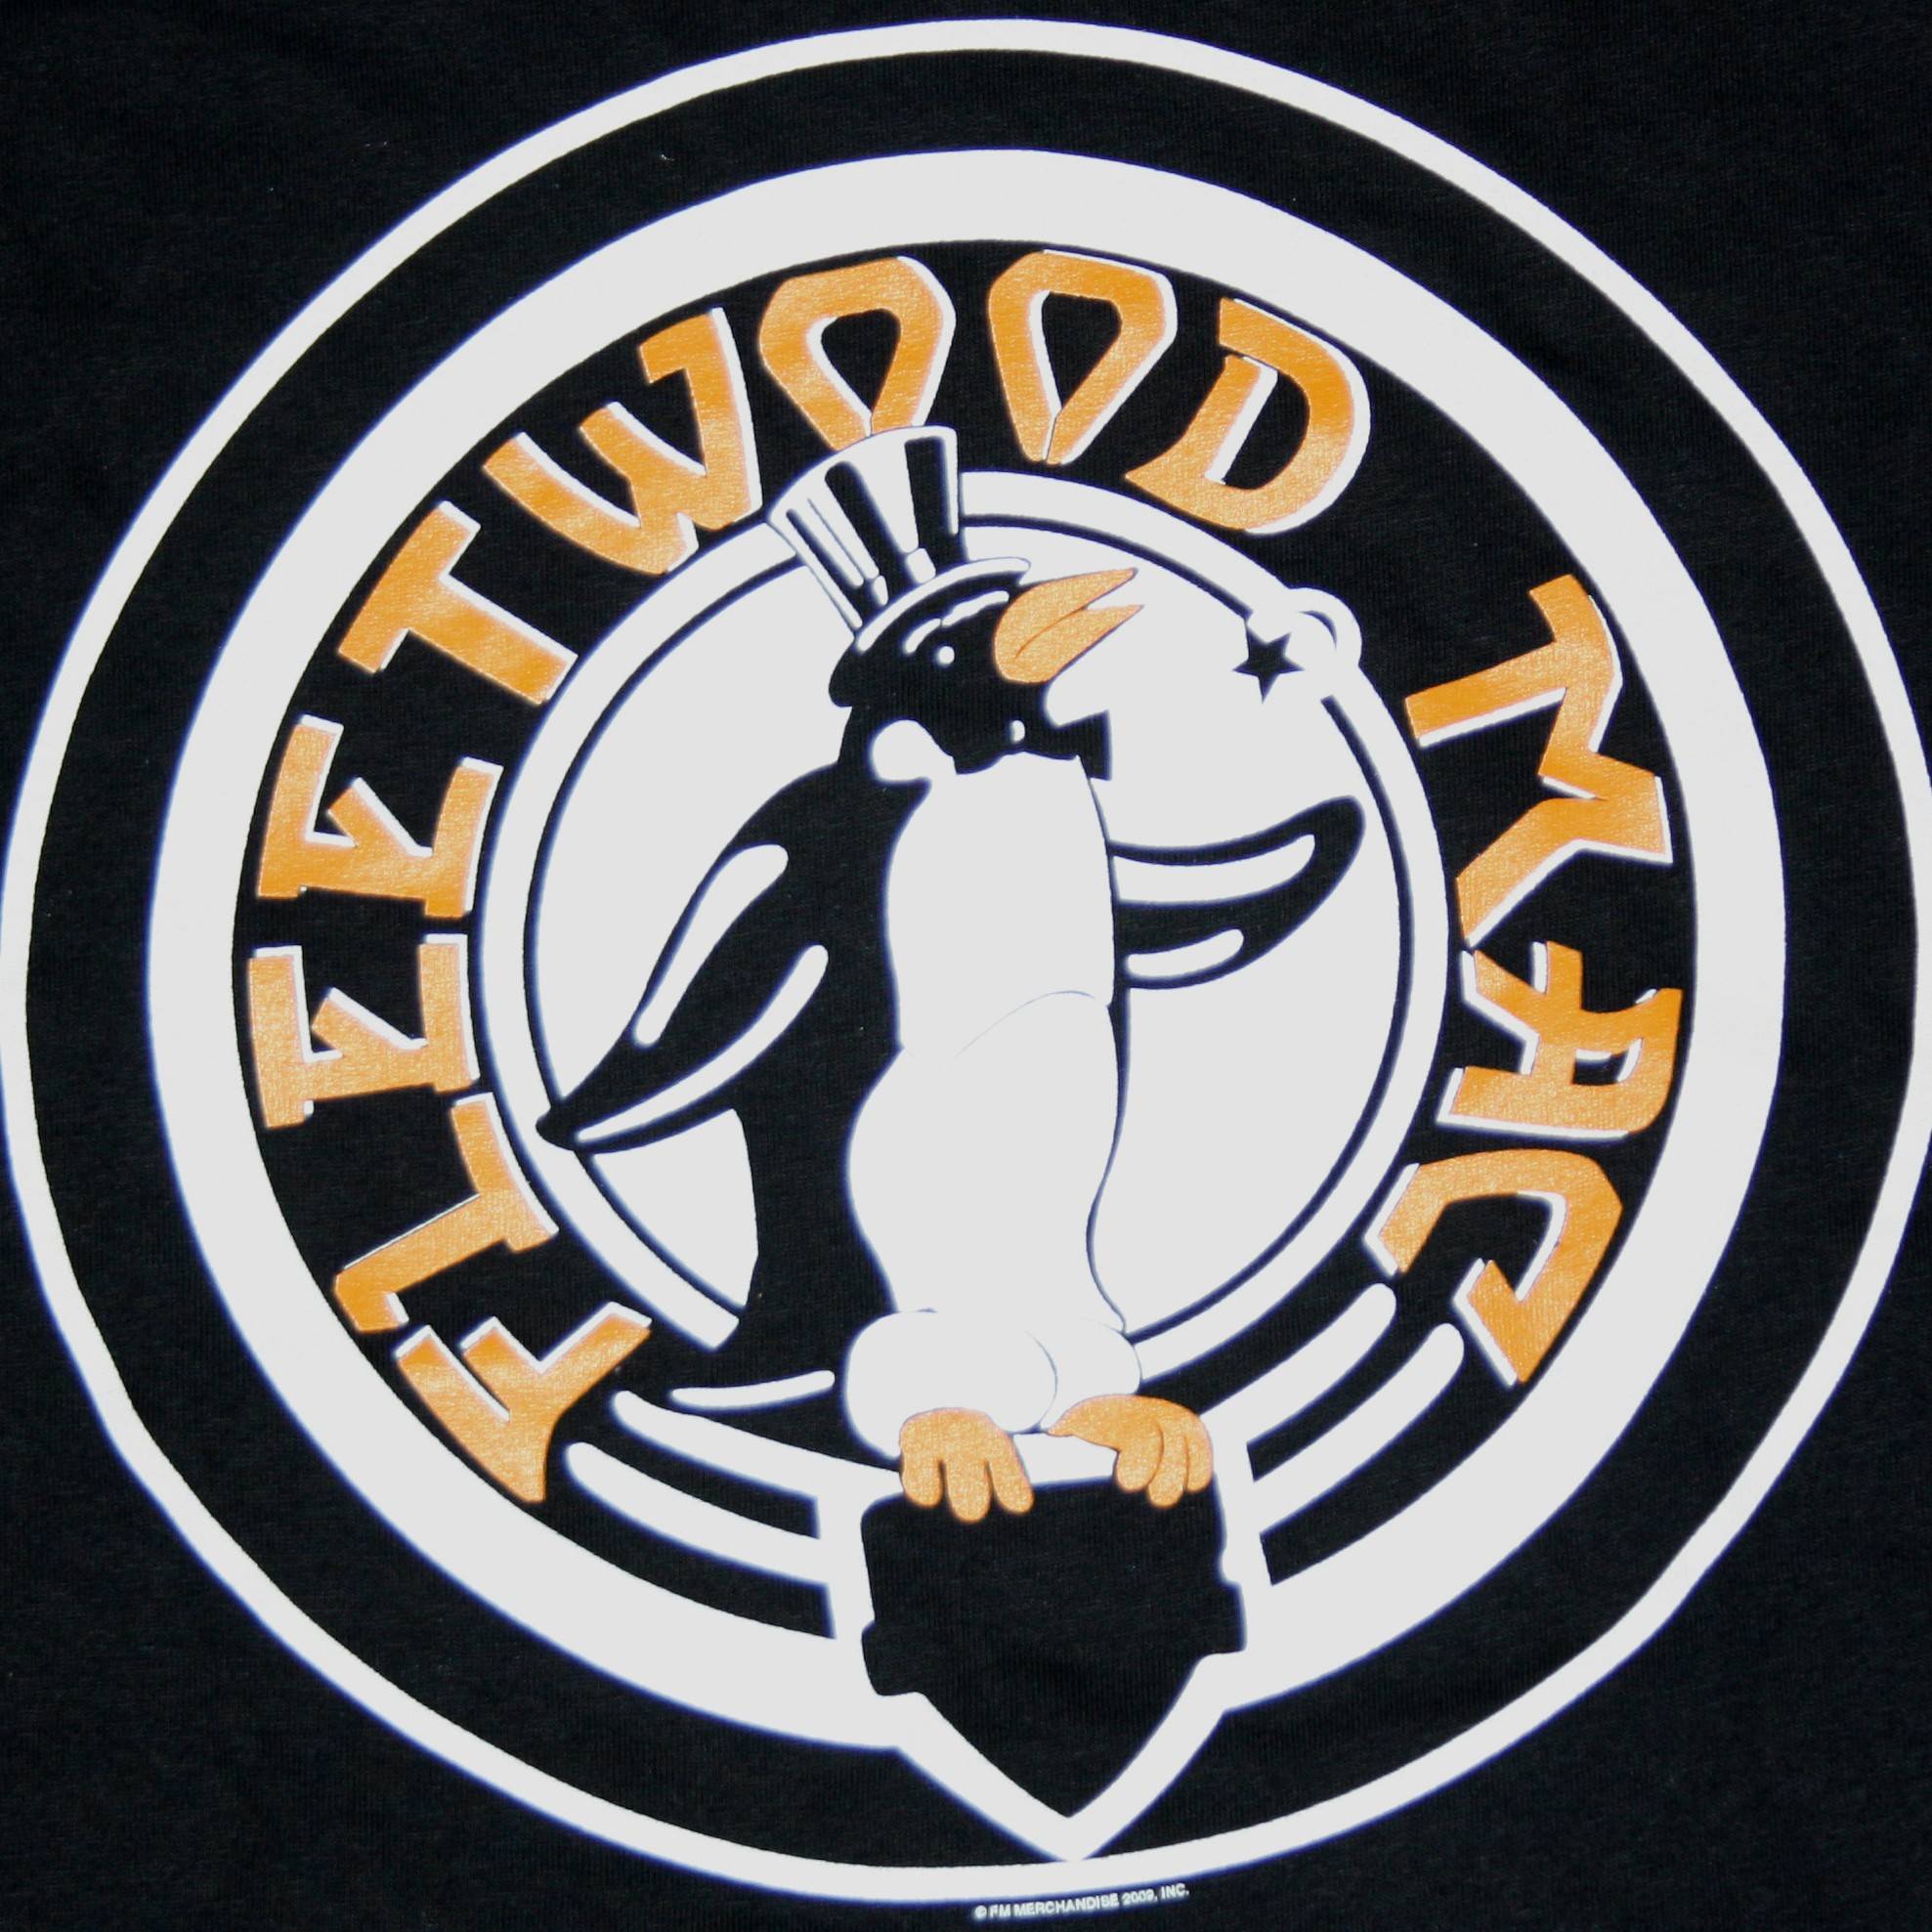 Fleetwood Mac Logo - New R FleetwoodMac Logo, Based It Off Of This Logo From One Of Their